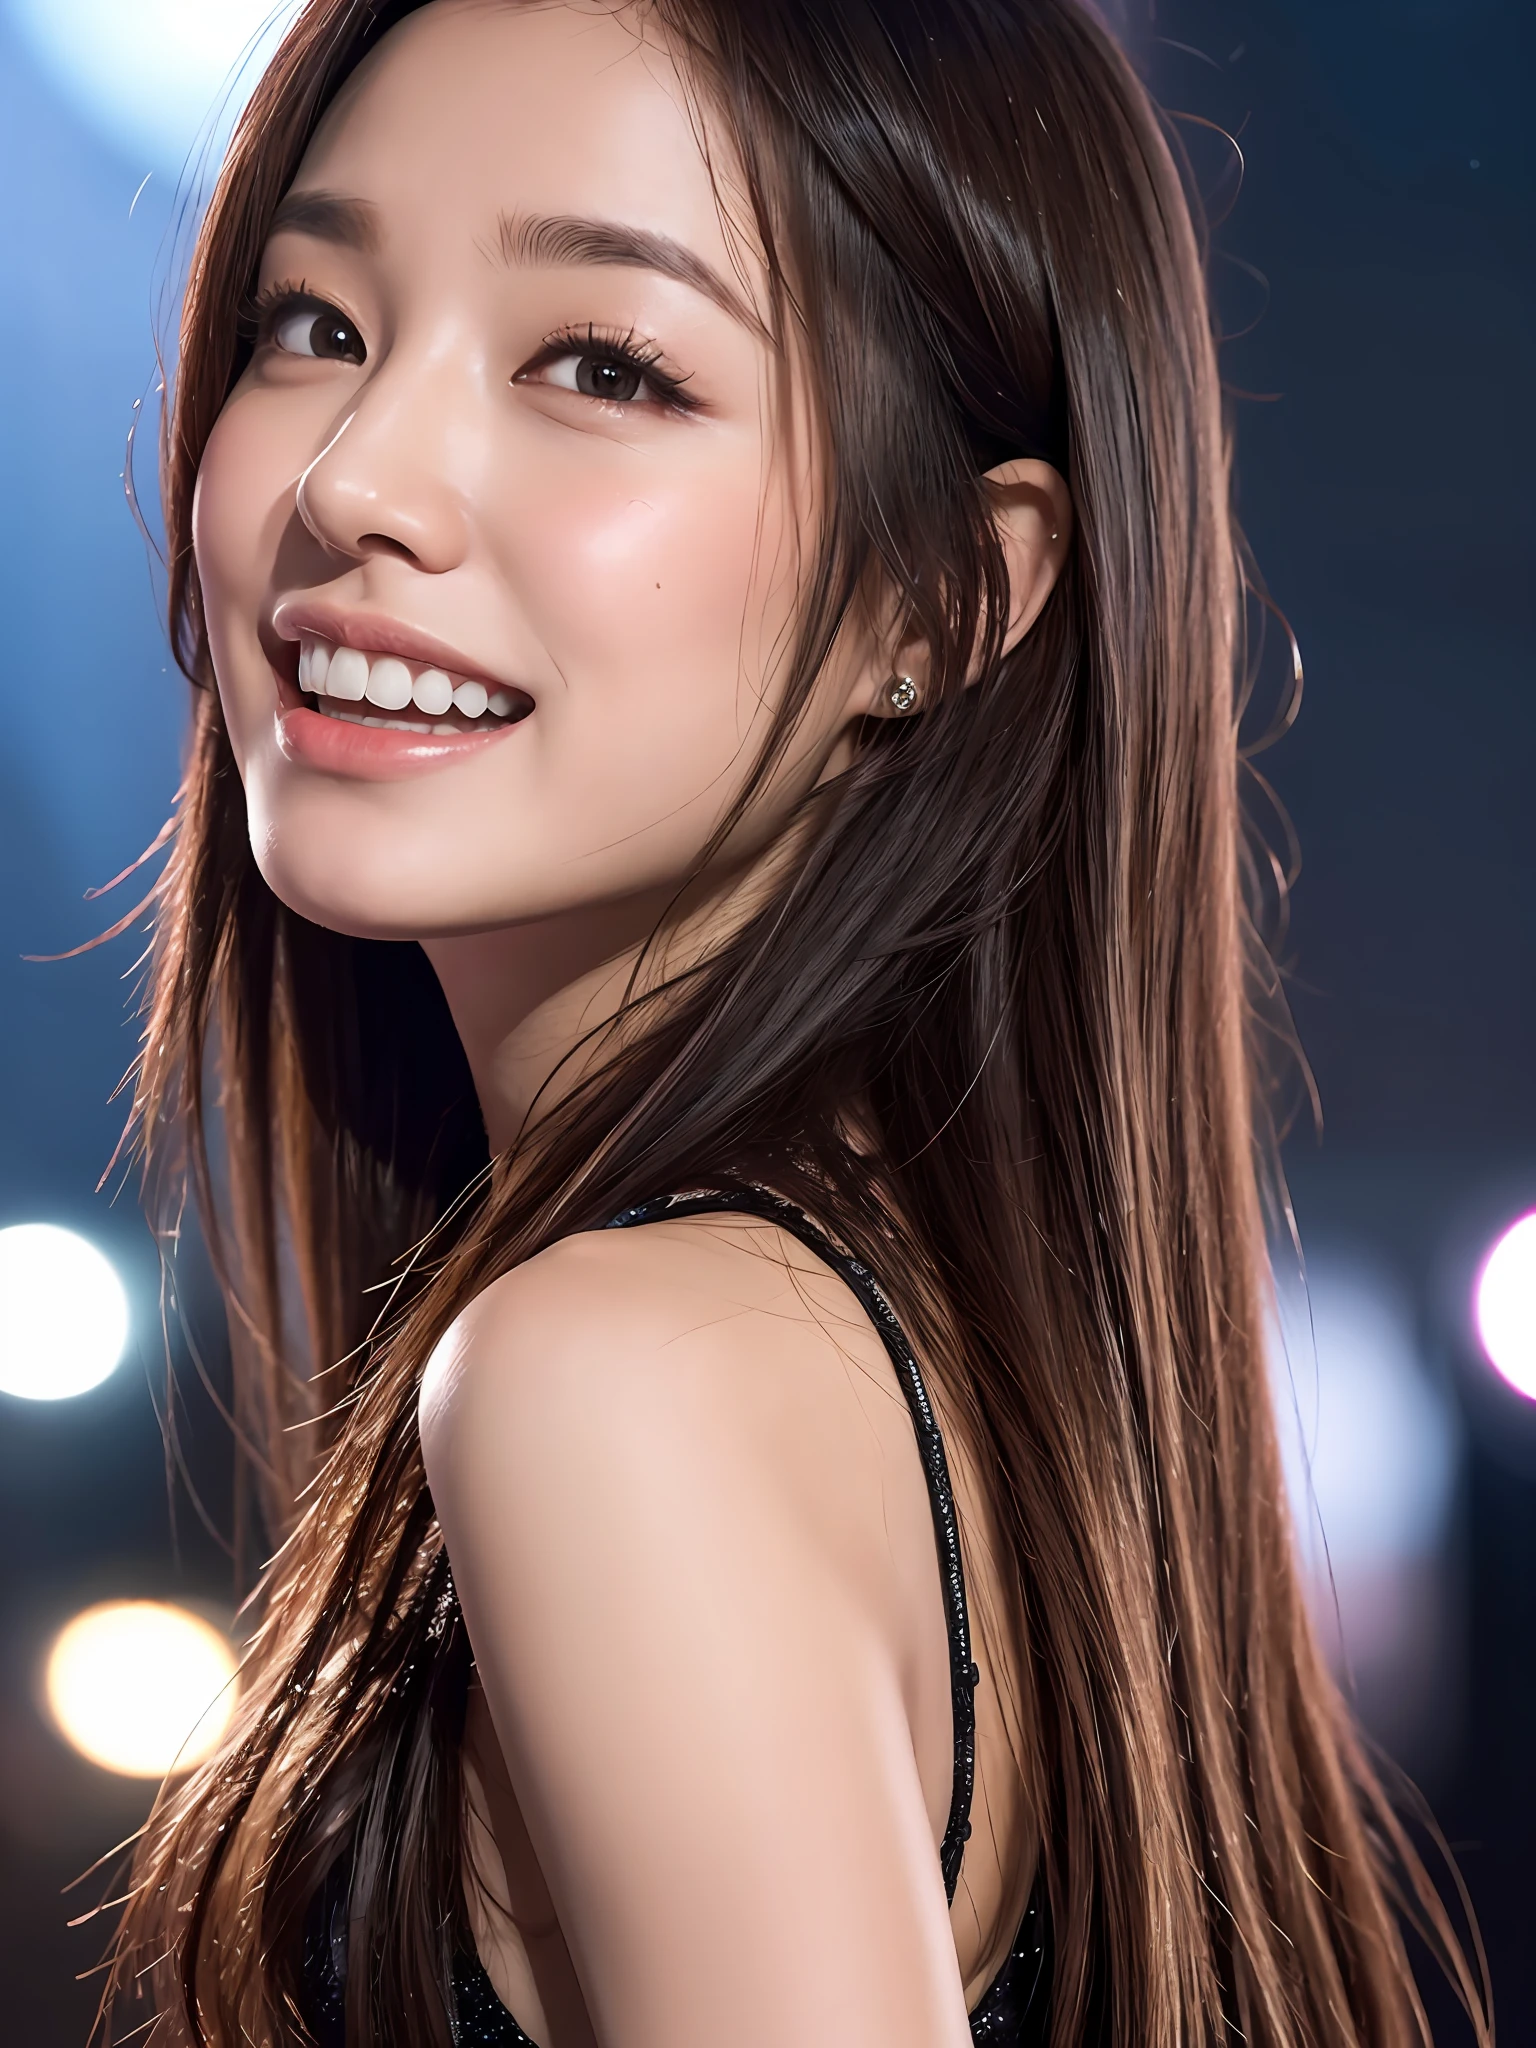 A Close Up Of A Woman With Long Hair Smiling At The Camera Seaart Ai